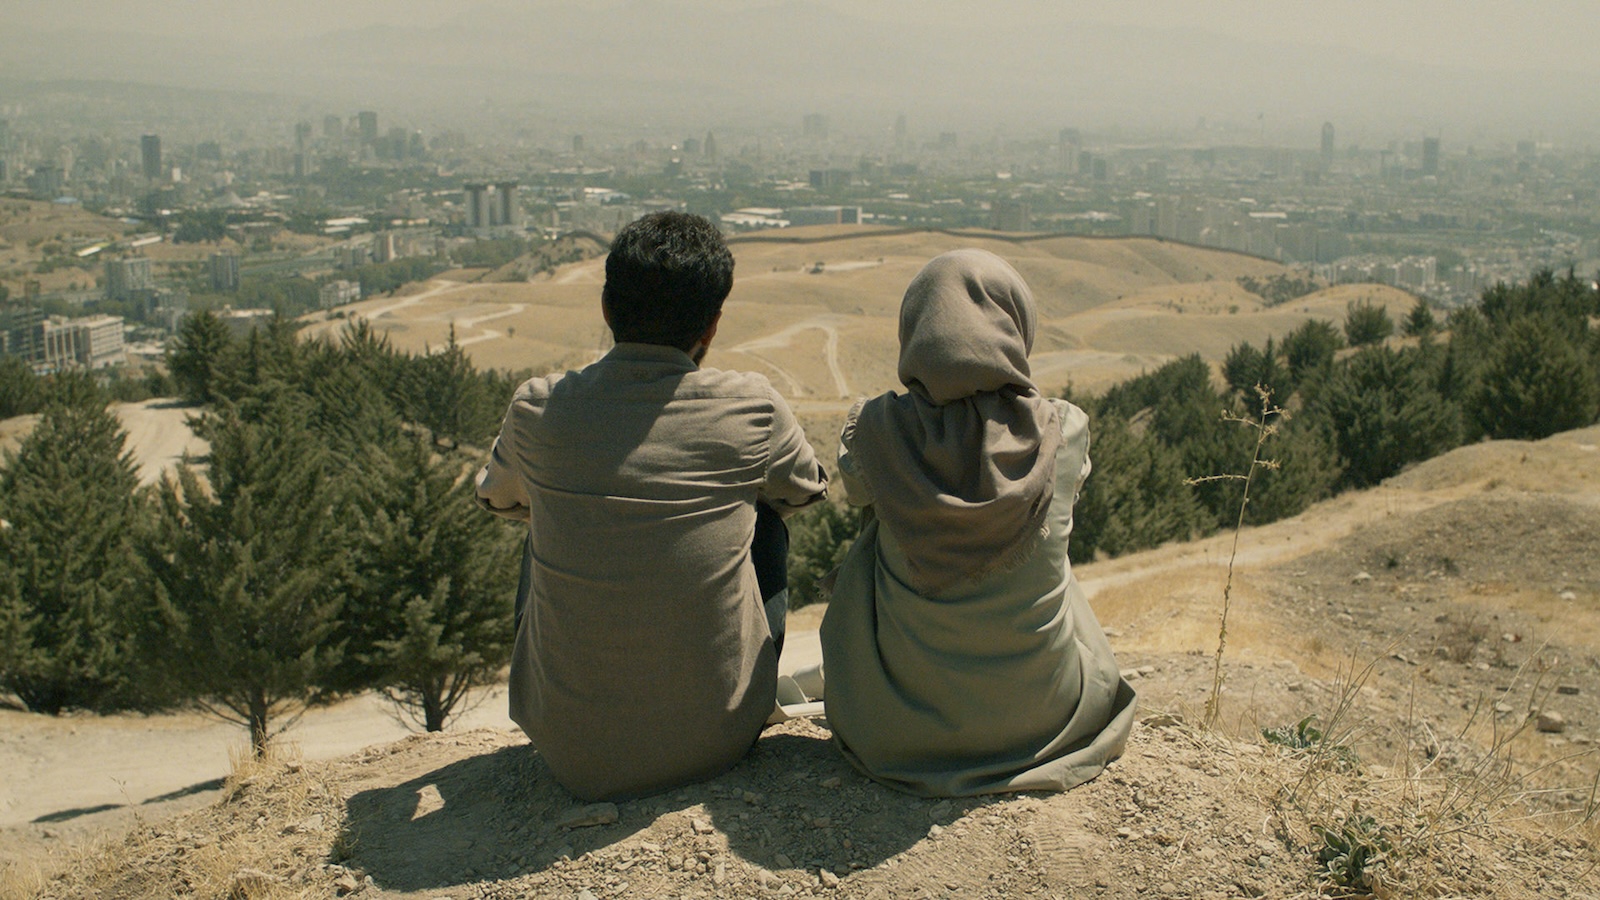 Seen from behind, a man and woman sit on a hillside looking over a parched, dusty middle-eastern landscape